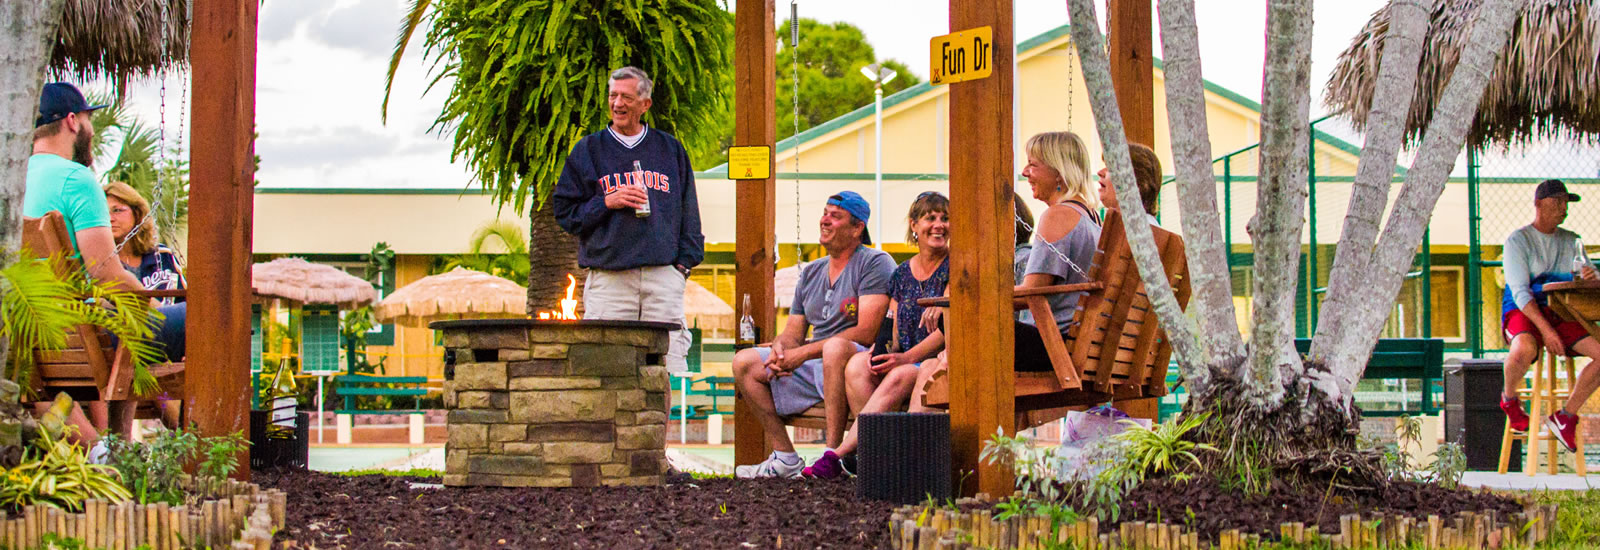 When you plan your group event at a KOA Campground, you know you're about to experience consistent high-quality amenities and friendly experienced customer service